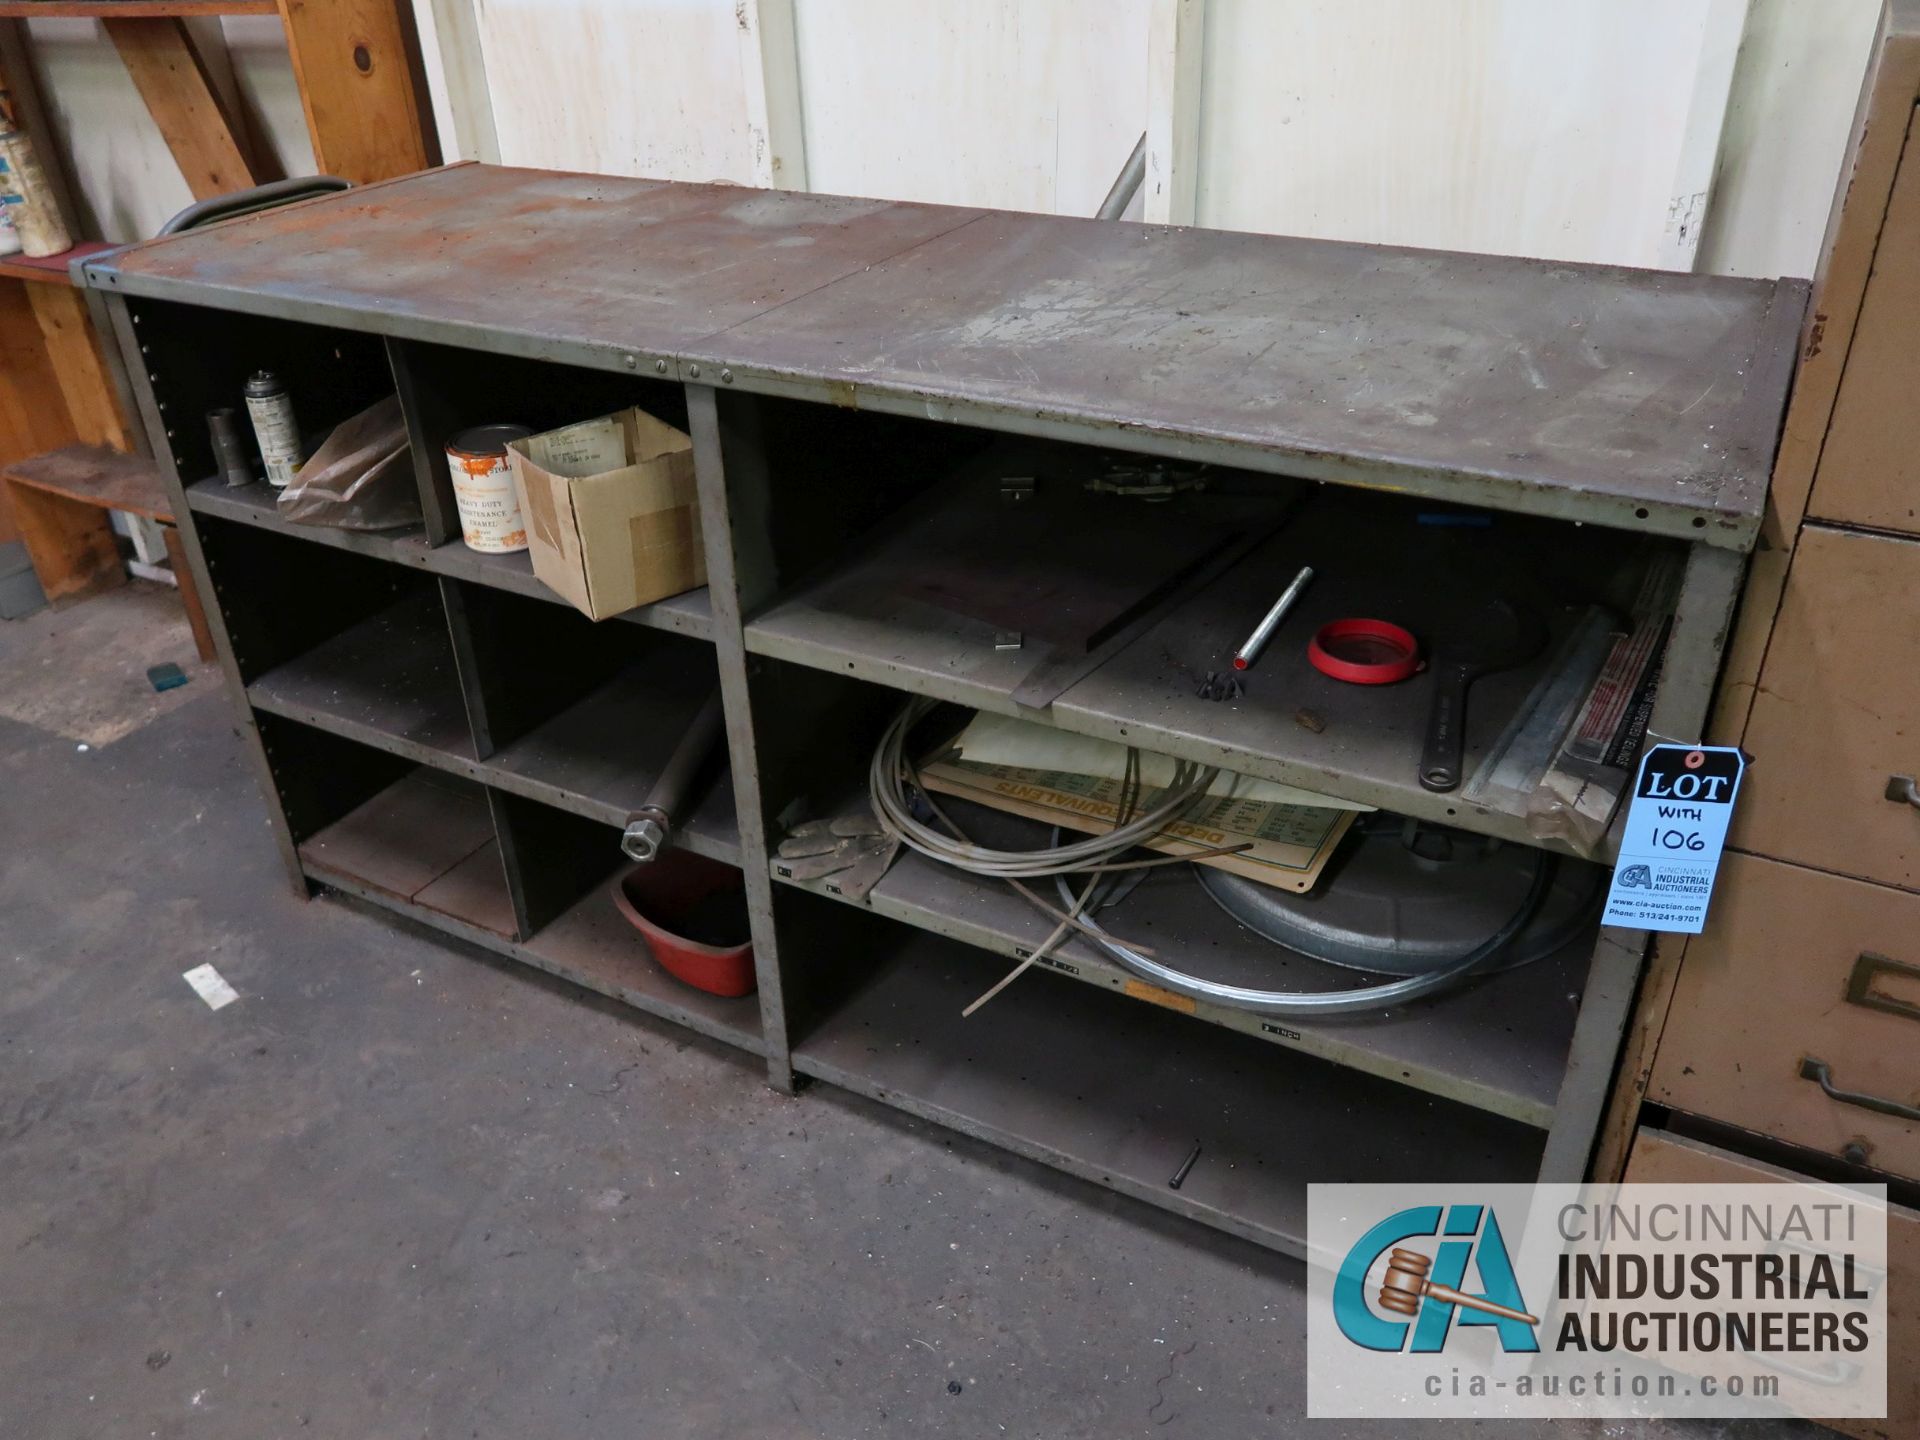 2-DOOR STORAGE CABINET WITH CONTENTS, INCLUDING HARDWARE & ELECTRICAL, WITH STEEL SHELVING & FILE - Image 3 of 3